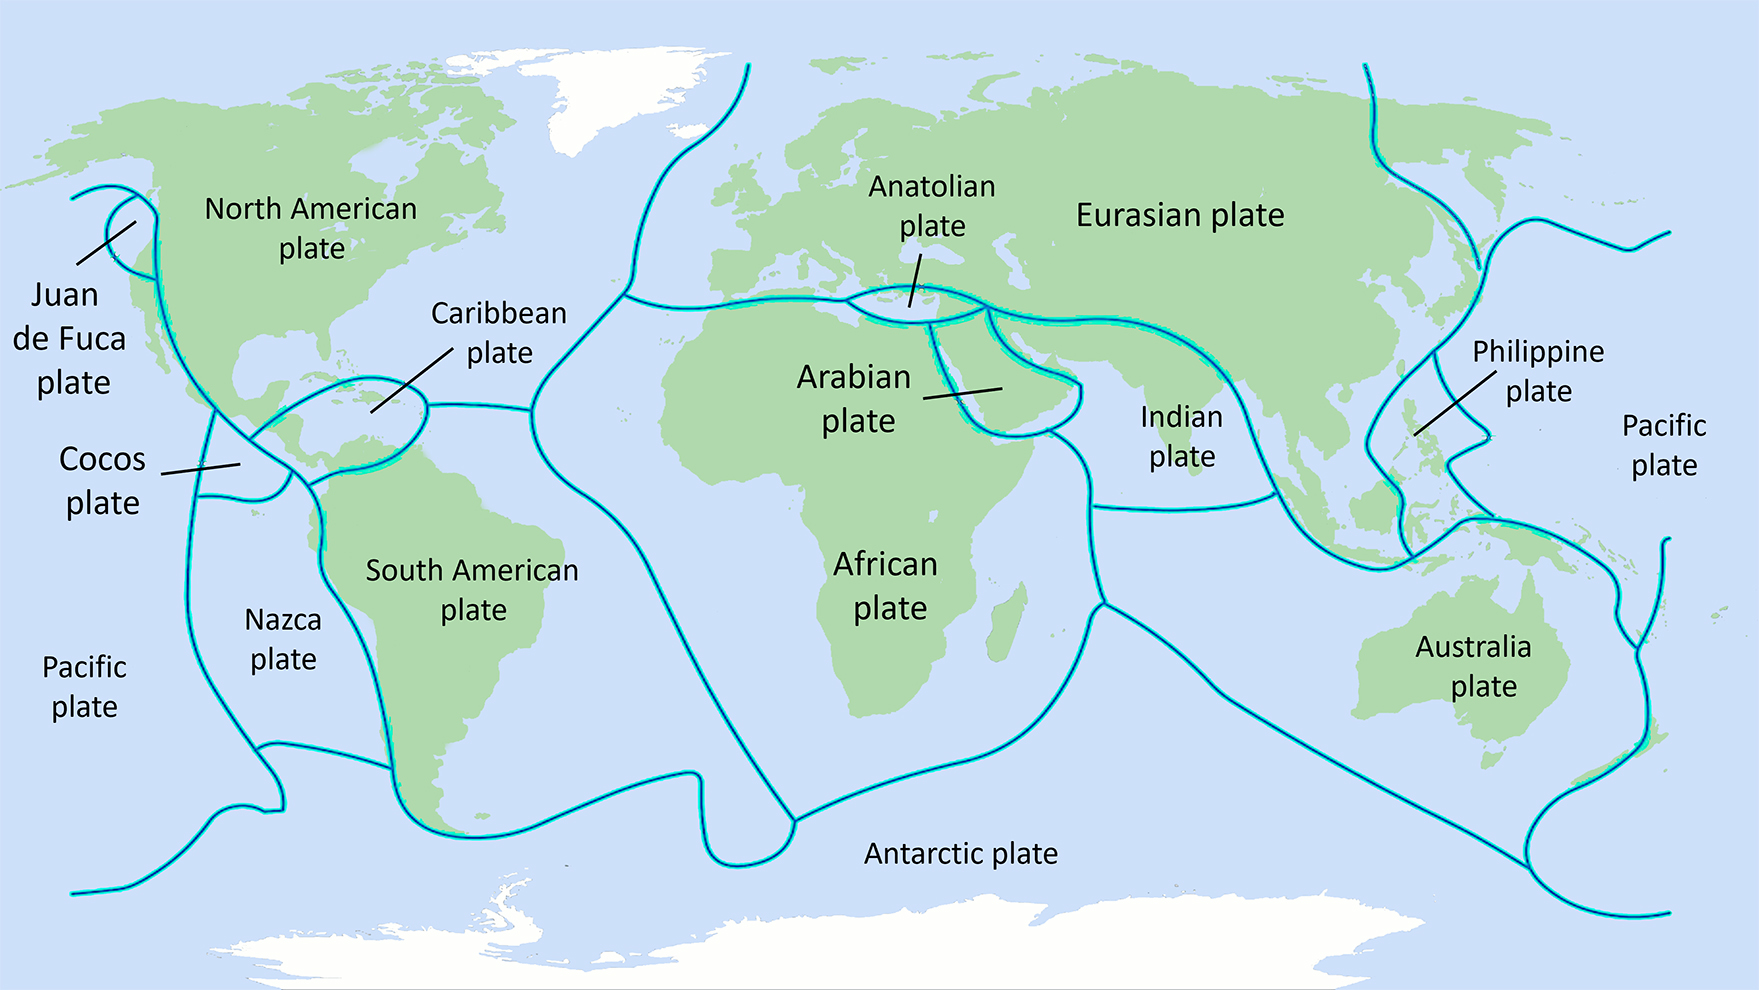 This image shows a map of the world with the major tectonic plates outlined and named. Tectonic plates are large pieces of the Earth’s crust that move and interact with each other, causing earthquakes, volcanoes, and mountain formation. The map also shows the boundaries between the plates, which can be convergent, divergent, or transform.